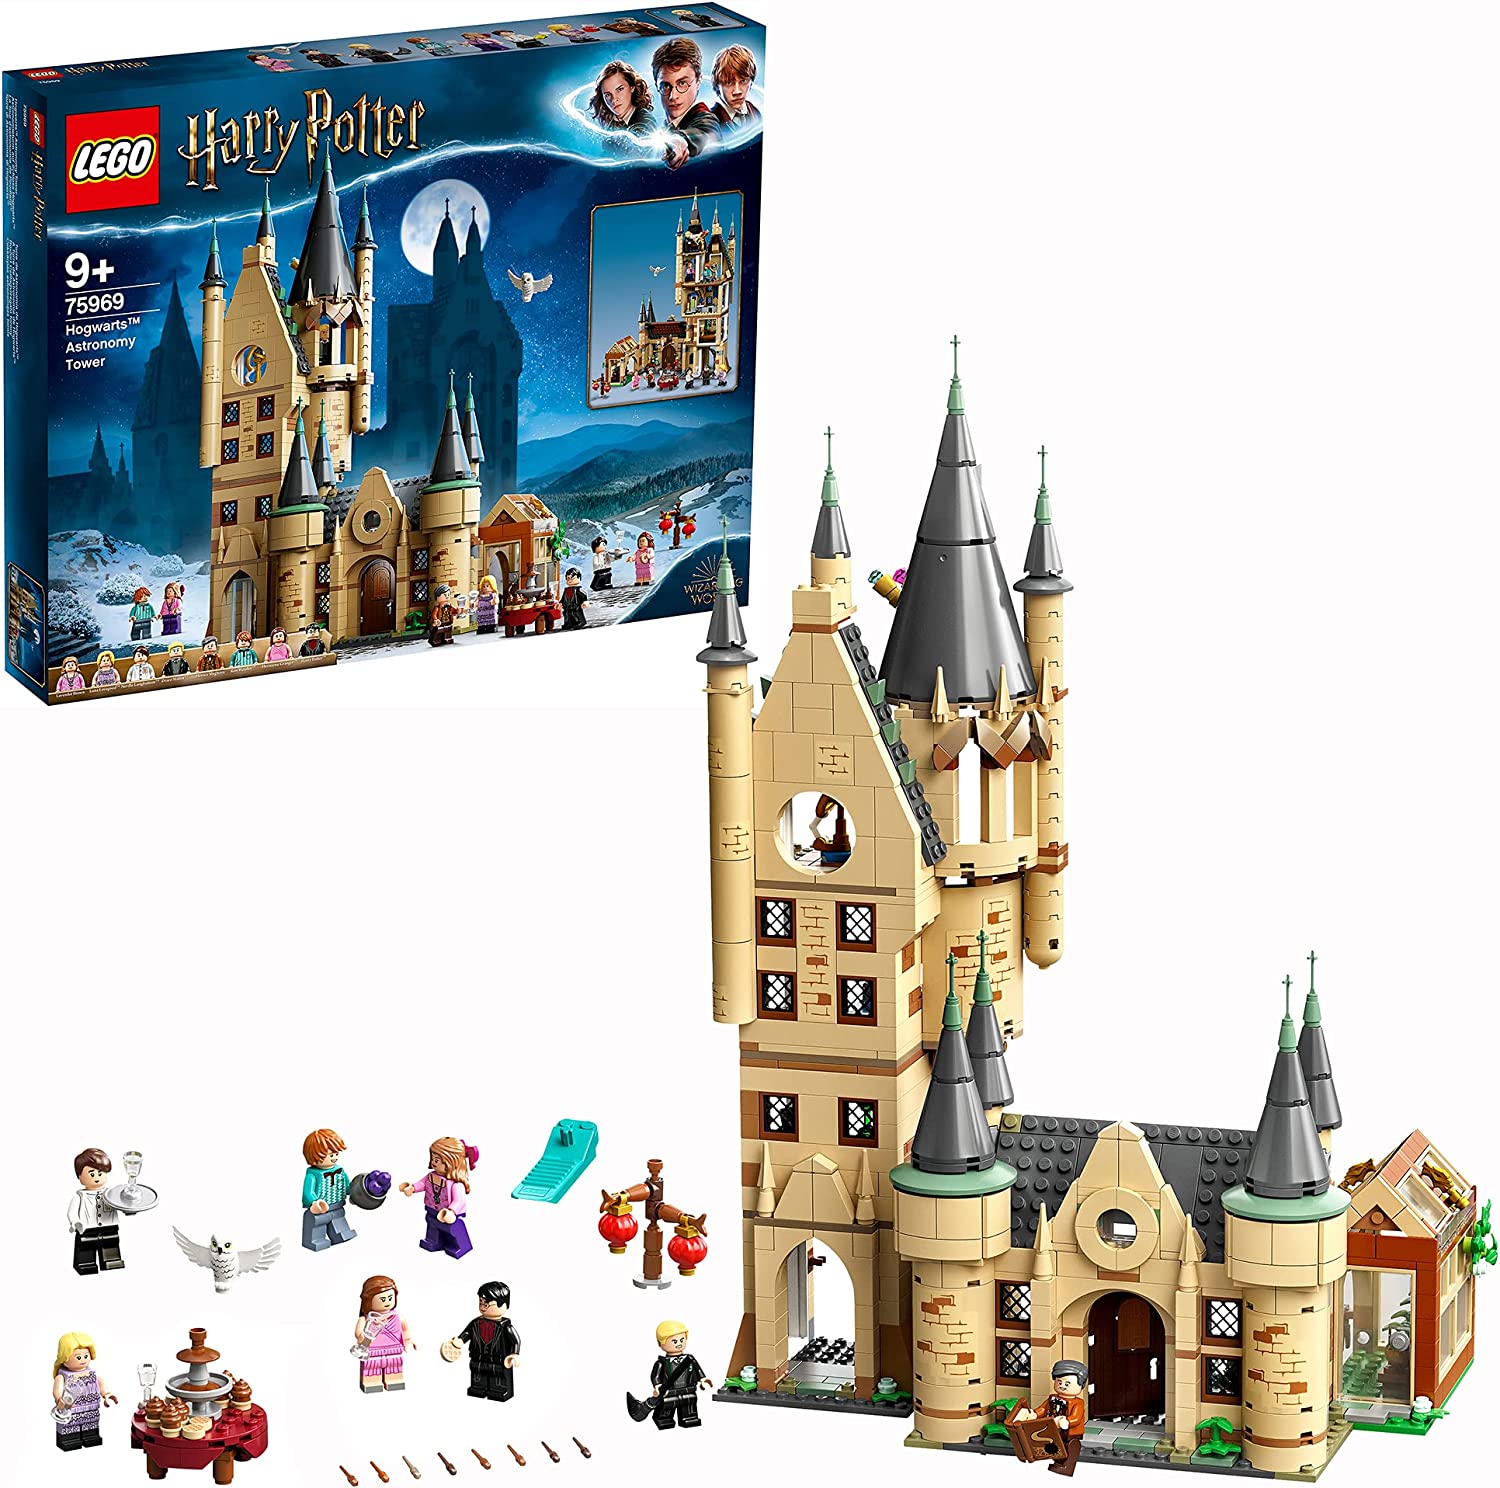 LEGO 75969 Harry Potter Astronomy Tower on Hogwarts Castle, Toy Compatible with the Great Hall of Hogwarts and the Whip Willow